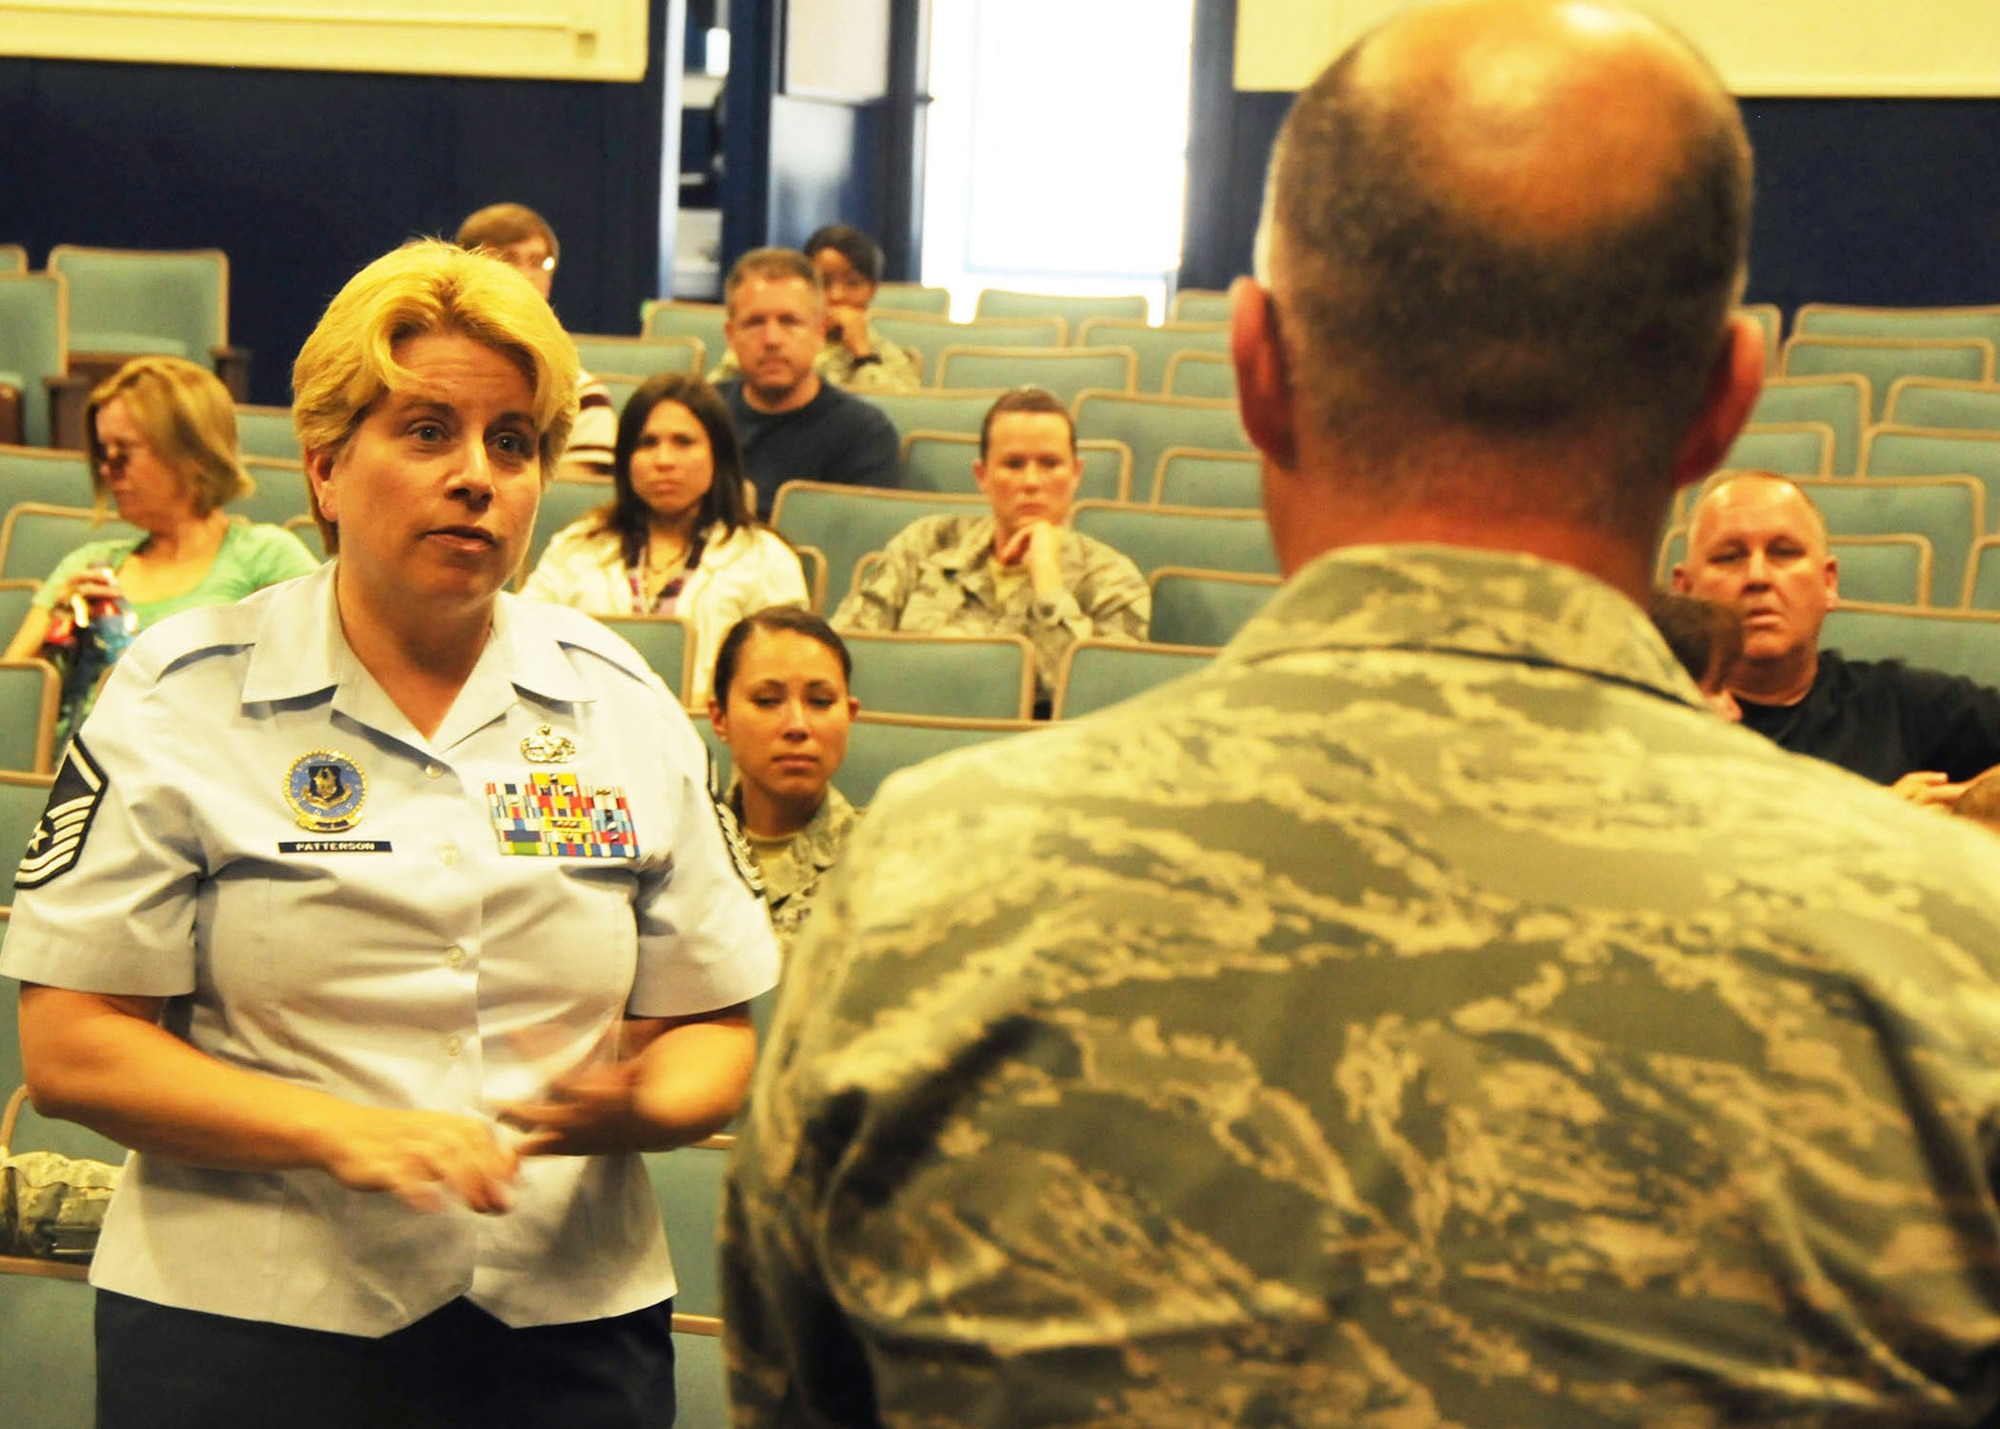 Master Sgt. Vicki Patterson, a local Reserve recruiter from the Eastern Regional Recruiting Squadron, poses a question to Chief Master Sgt. Dwight Badgett, the command chief for Air Force Reserve Command, following his mass briefing at Duke Field May 6.  Chief Badgett, the command’s top advocate for more than 60,000 Reserve and active-duty AFRC enlisted members, visited the 919th Special Operations Wing  May 5-6 to thank its enlisted Airmen them for their service, respond to their feedback and brief them on force development and other career enhancement programs and topics.  (U.S. Air Force photo/Adam Duckworth)

